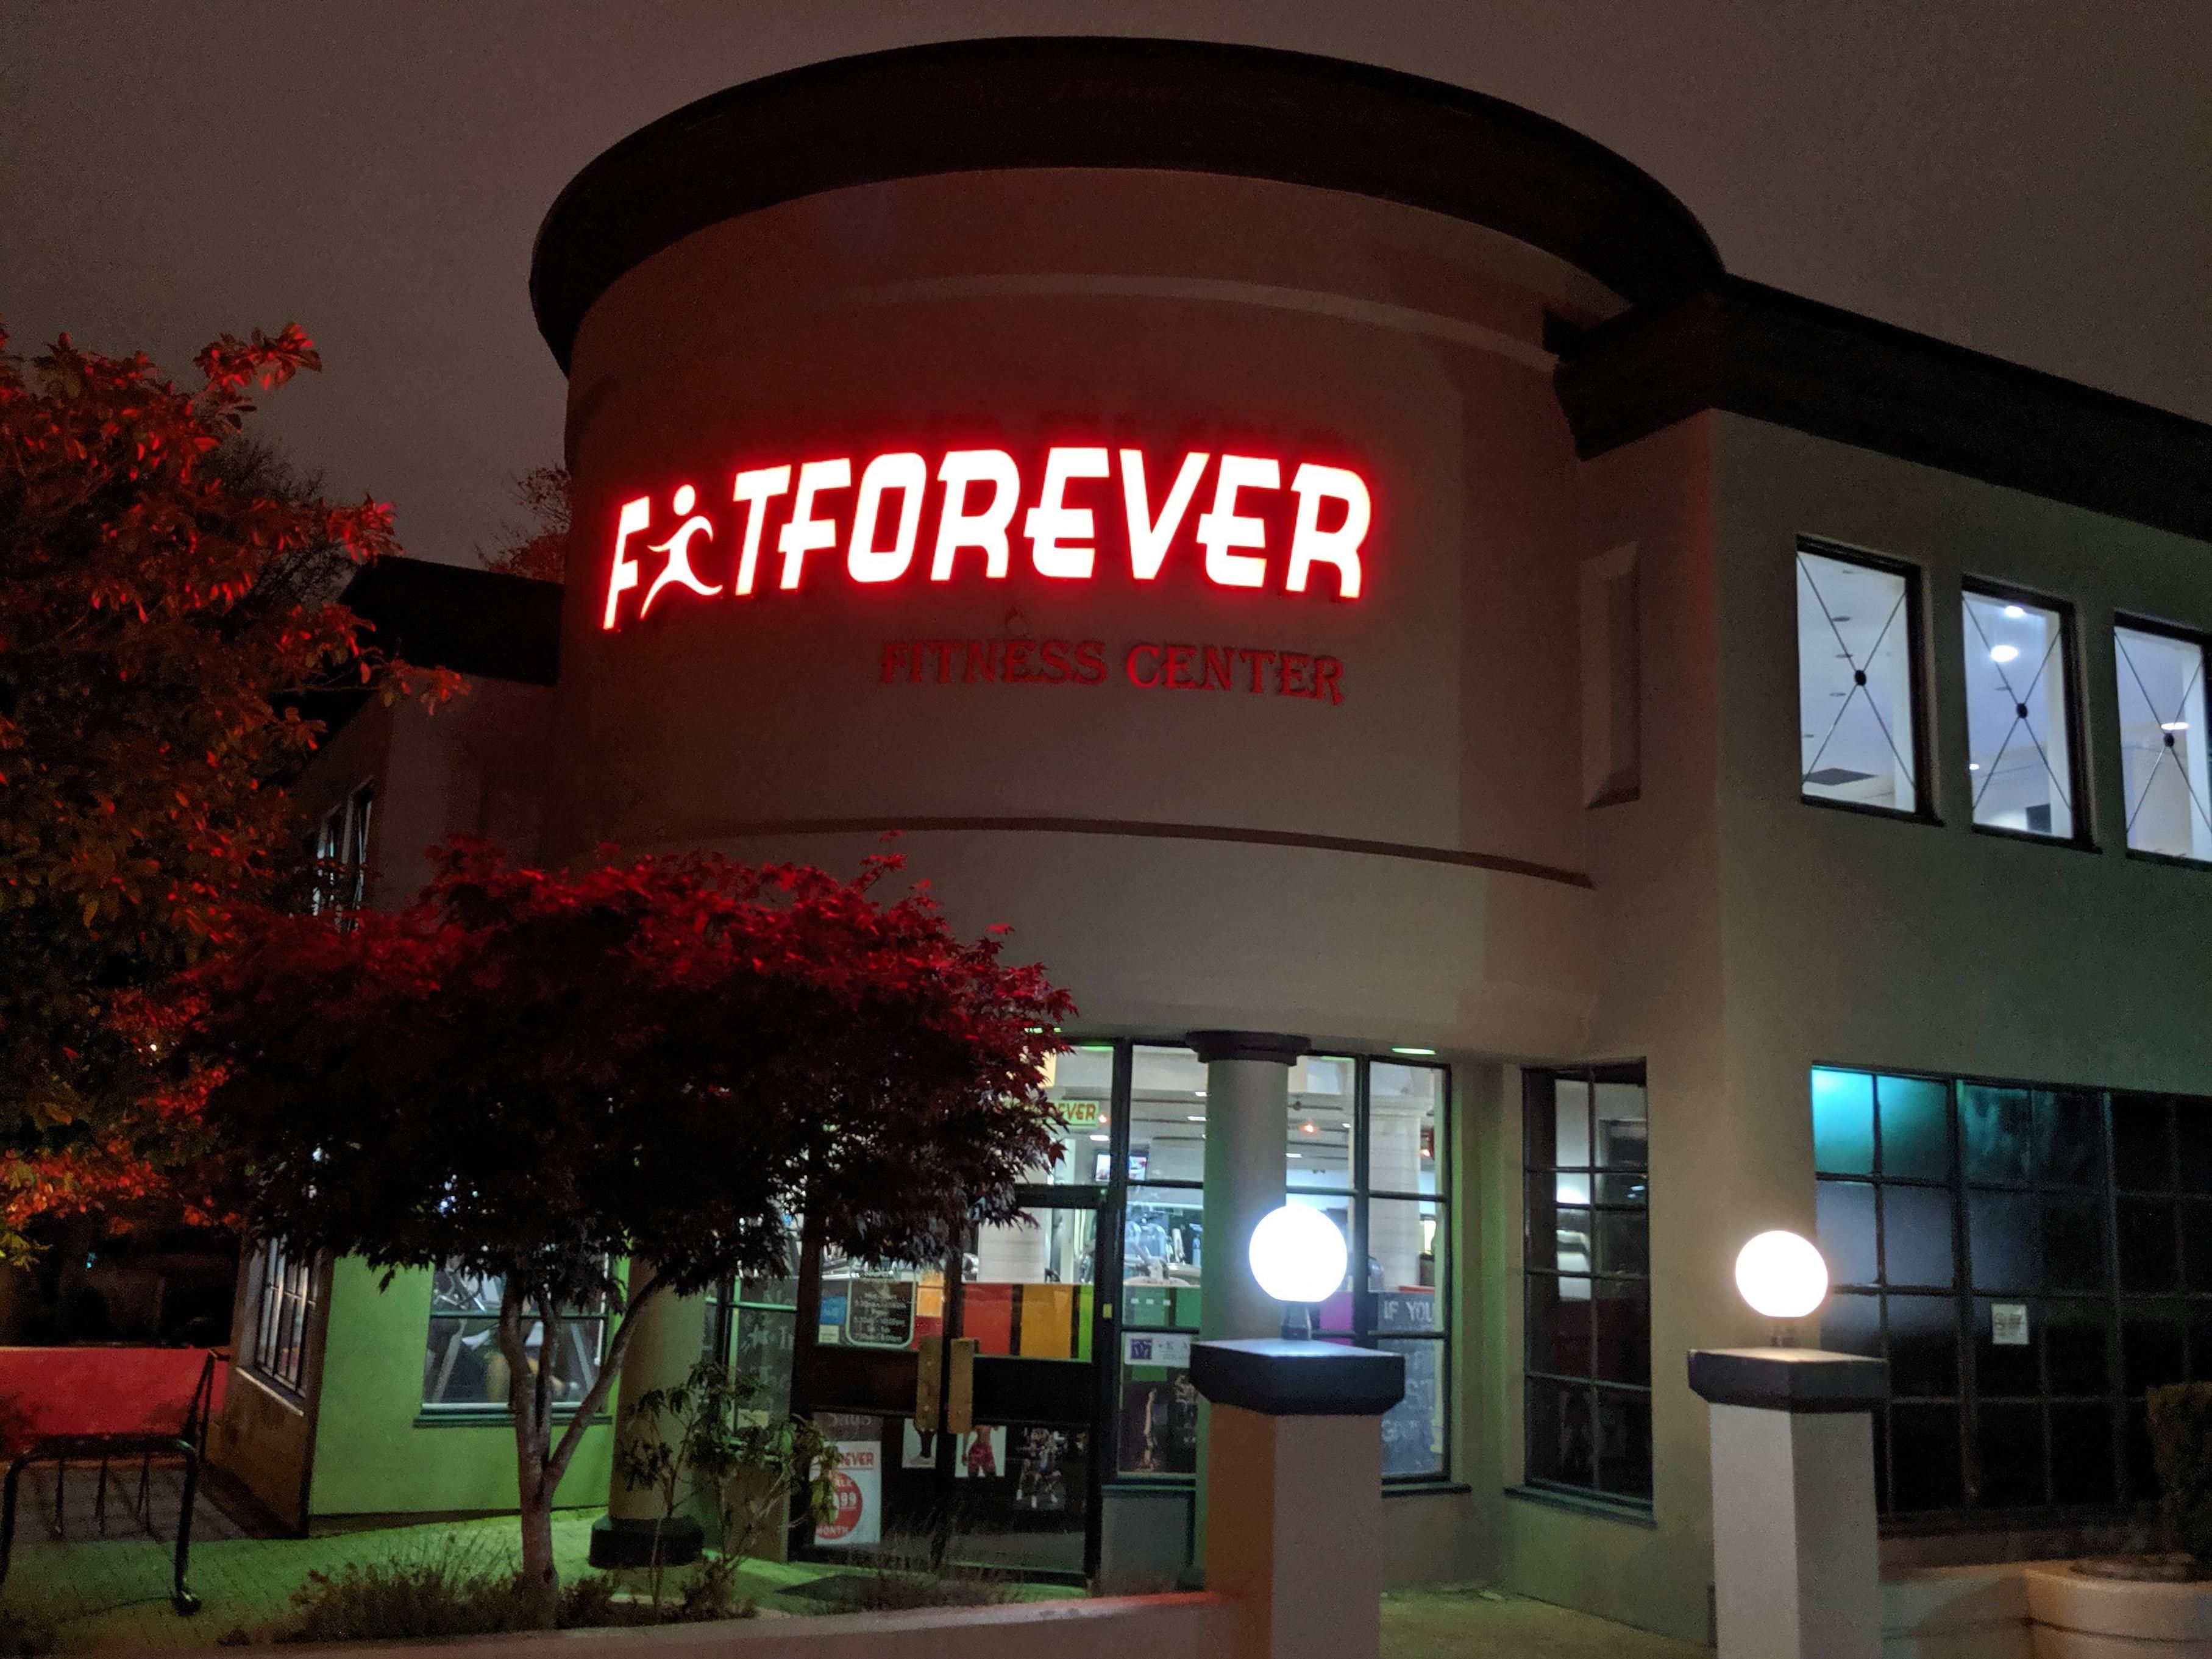 Fatforever is an interesting name for a gym